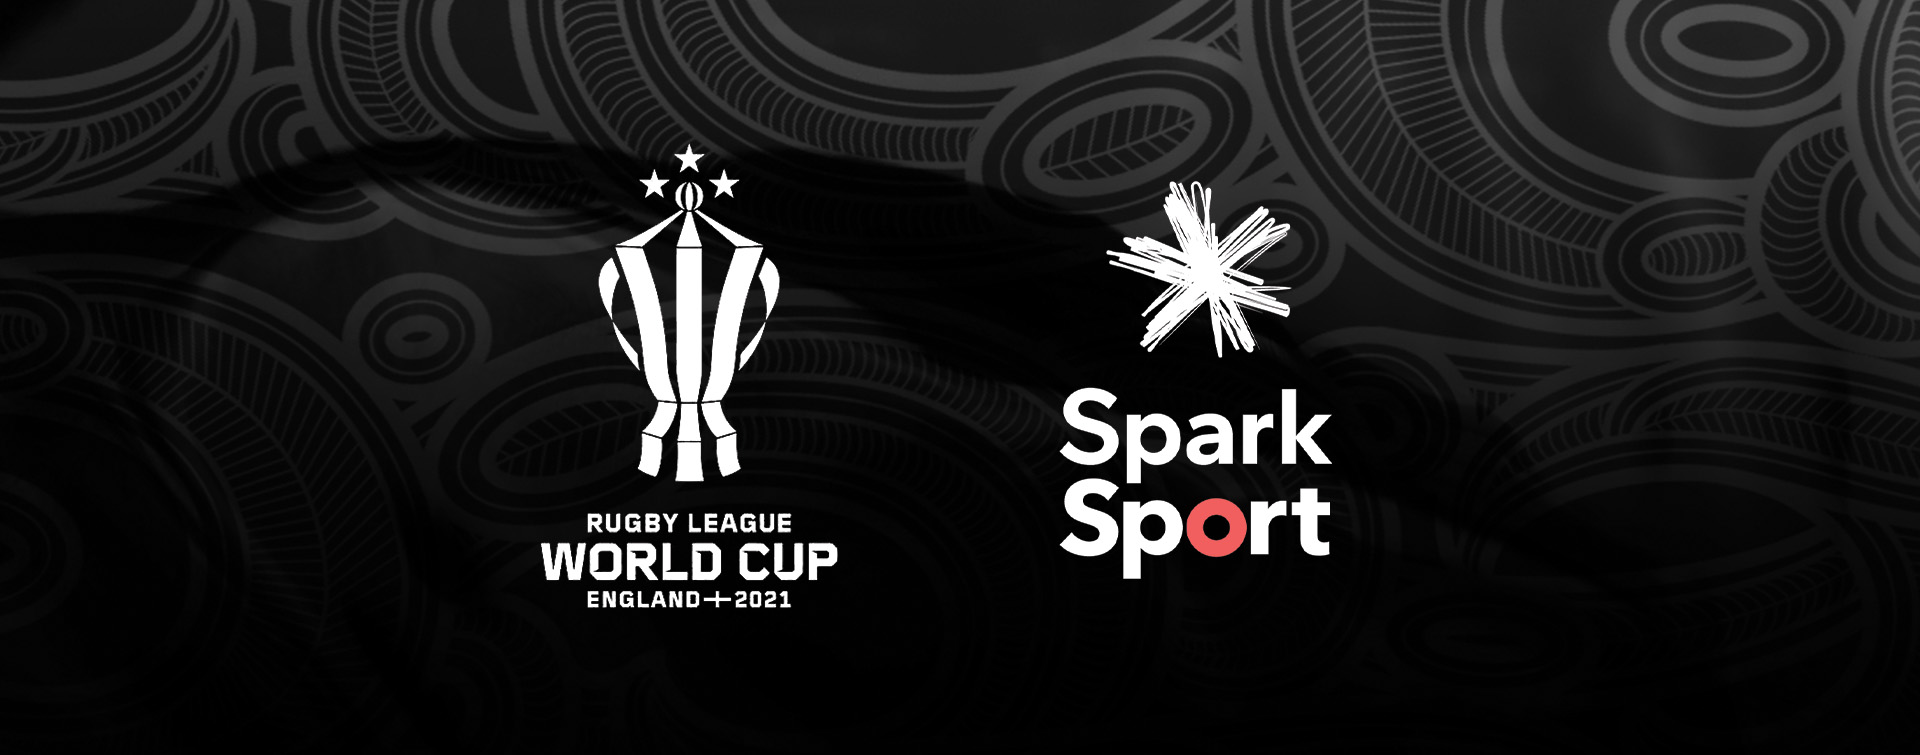 rugby league world cup streaming